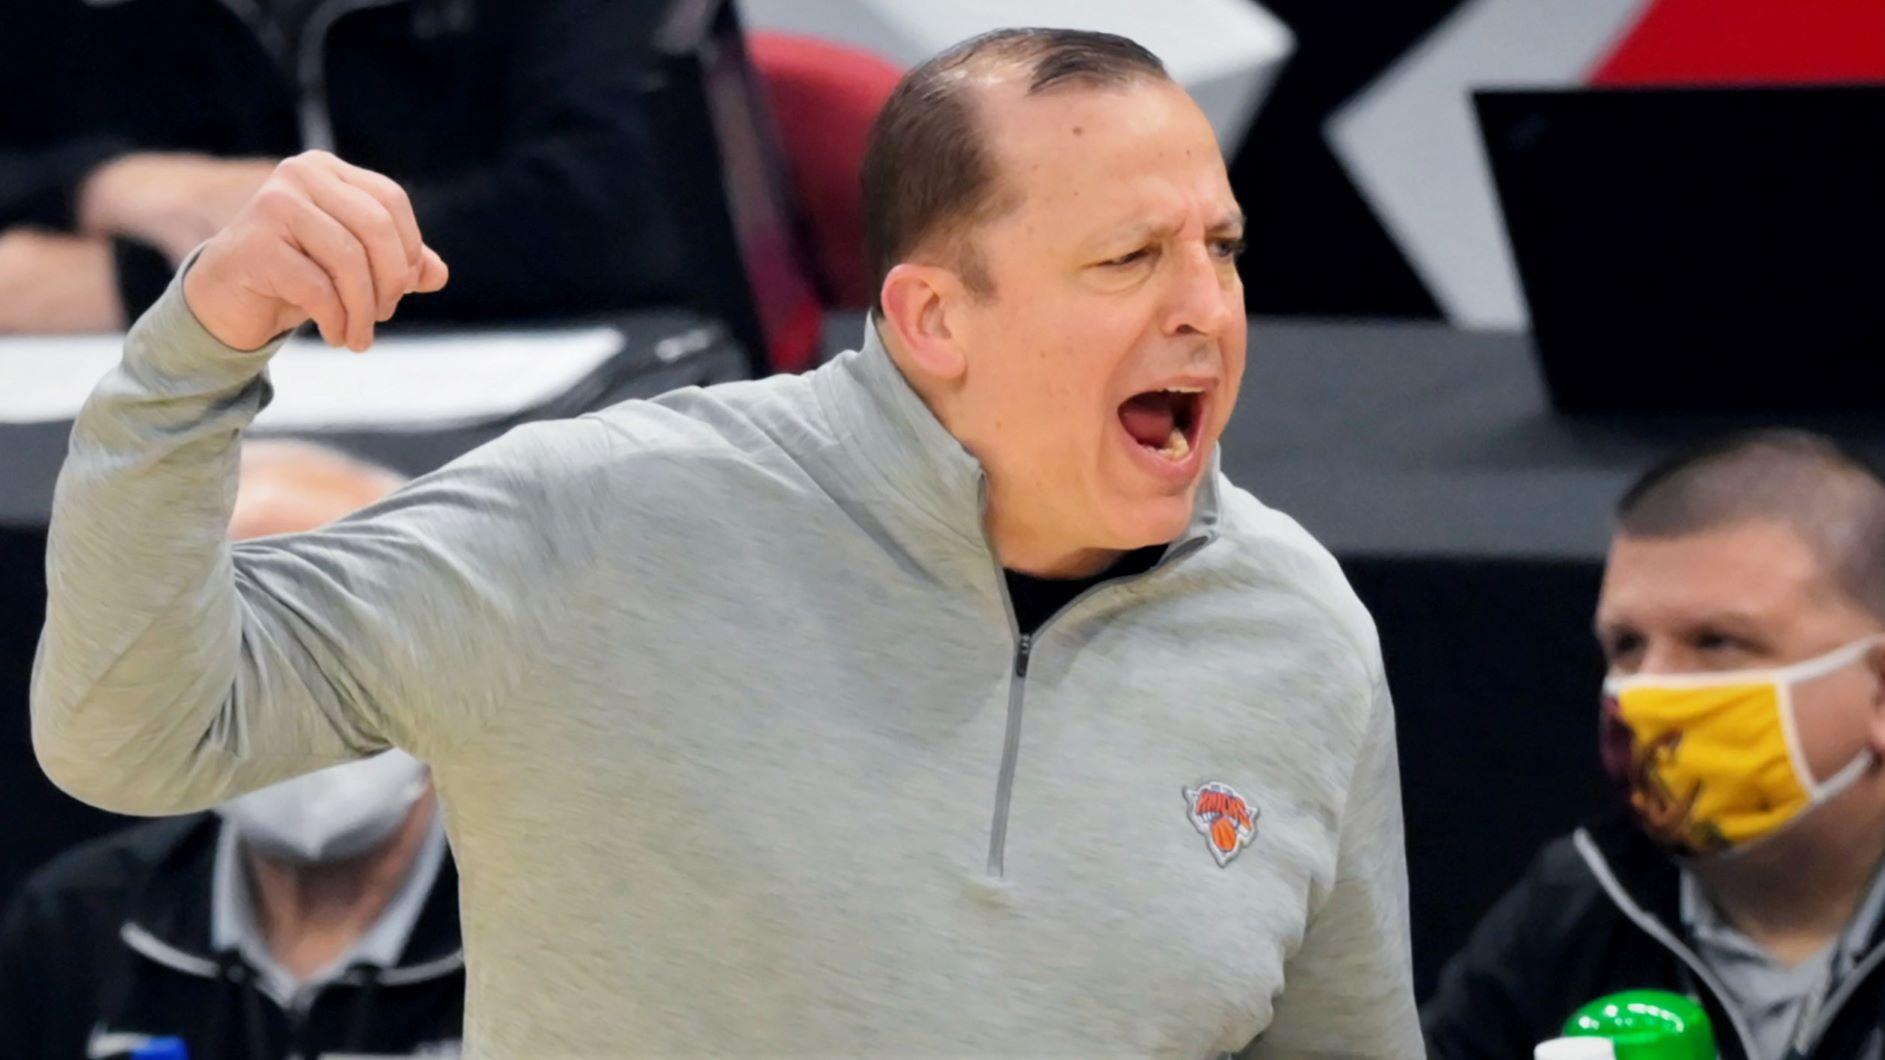 Dec 29, 2020; Cleveland, Ohio, USA; New York Knicks head coach Tom Thibodeau reacts in the first quarter against the Cleveland Cavaliers at Rocket Mortgage FieldHouse. Mandatory Credit: David Richard-USA TODAY Sports / © David Richard-USA TODAY Sports